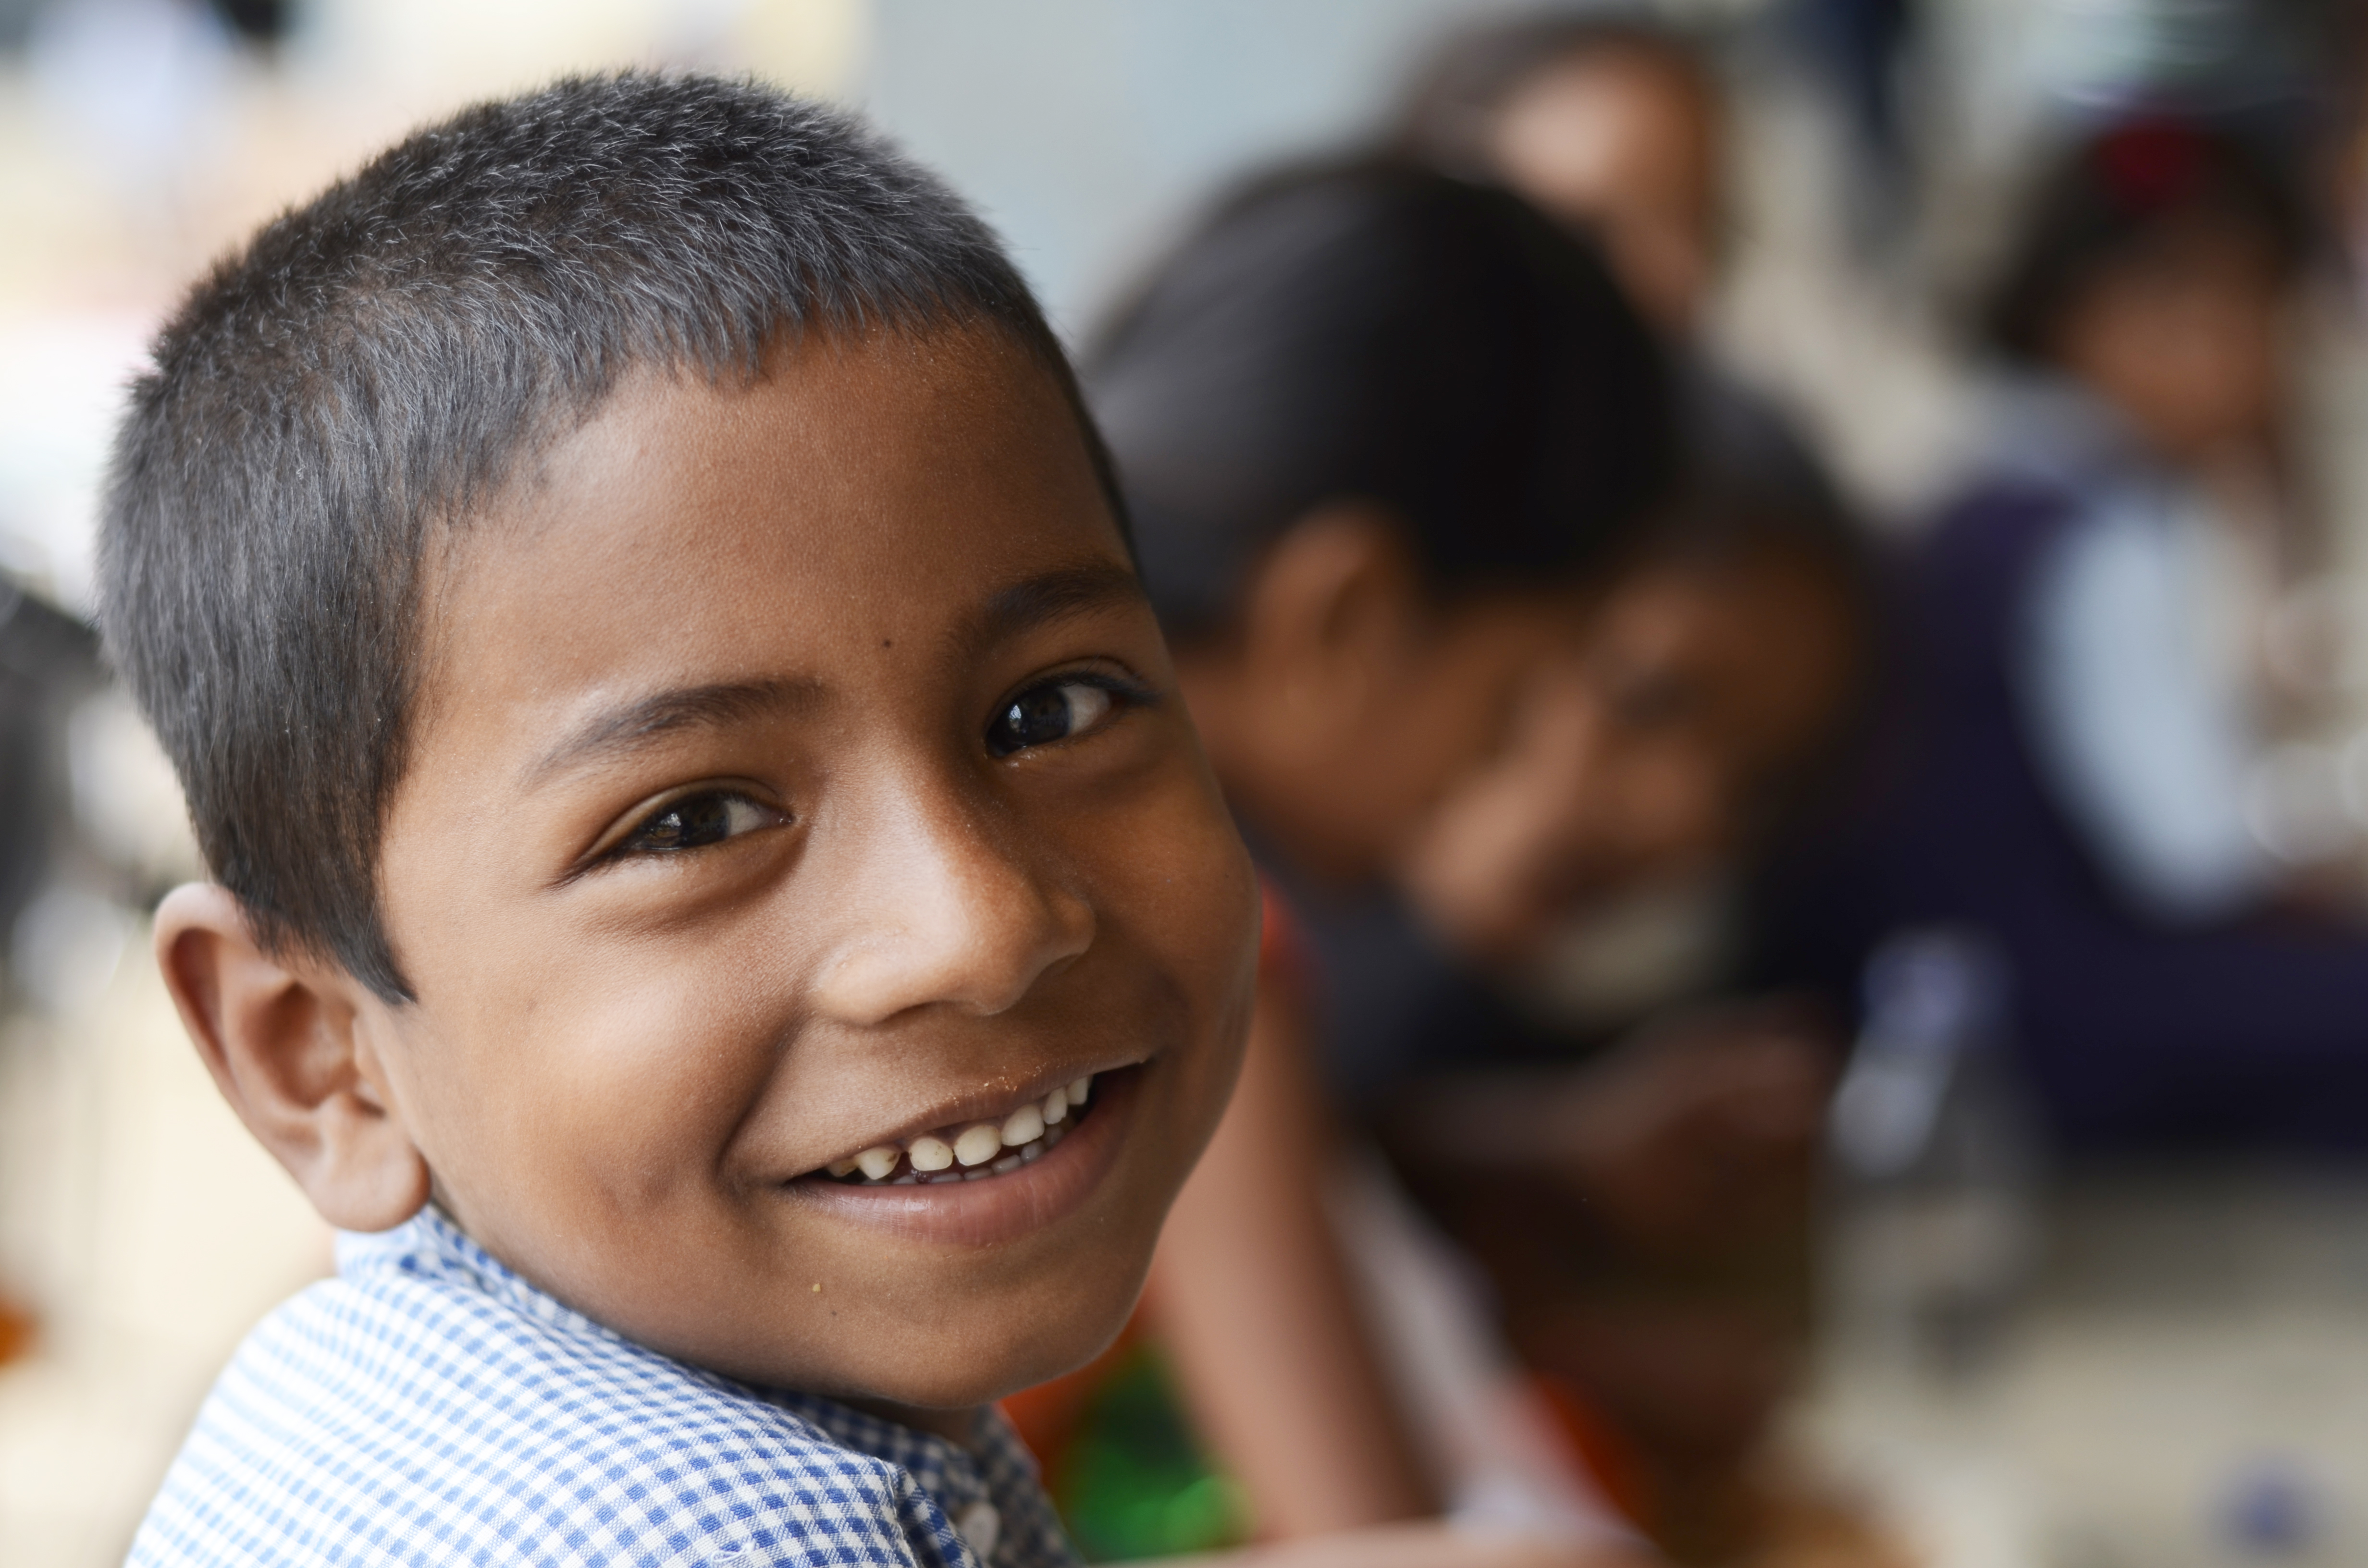 File:Dil Se Education - Smiling Child at School.JPG - Wikimedia Commons